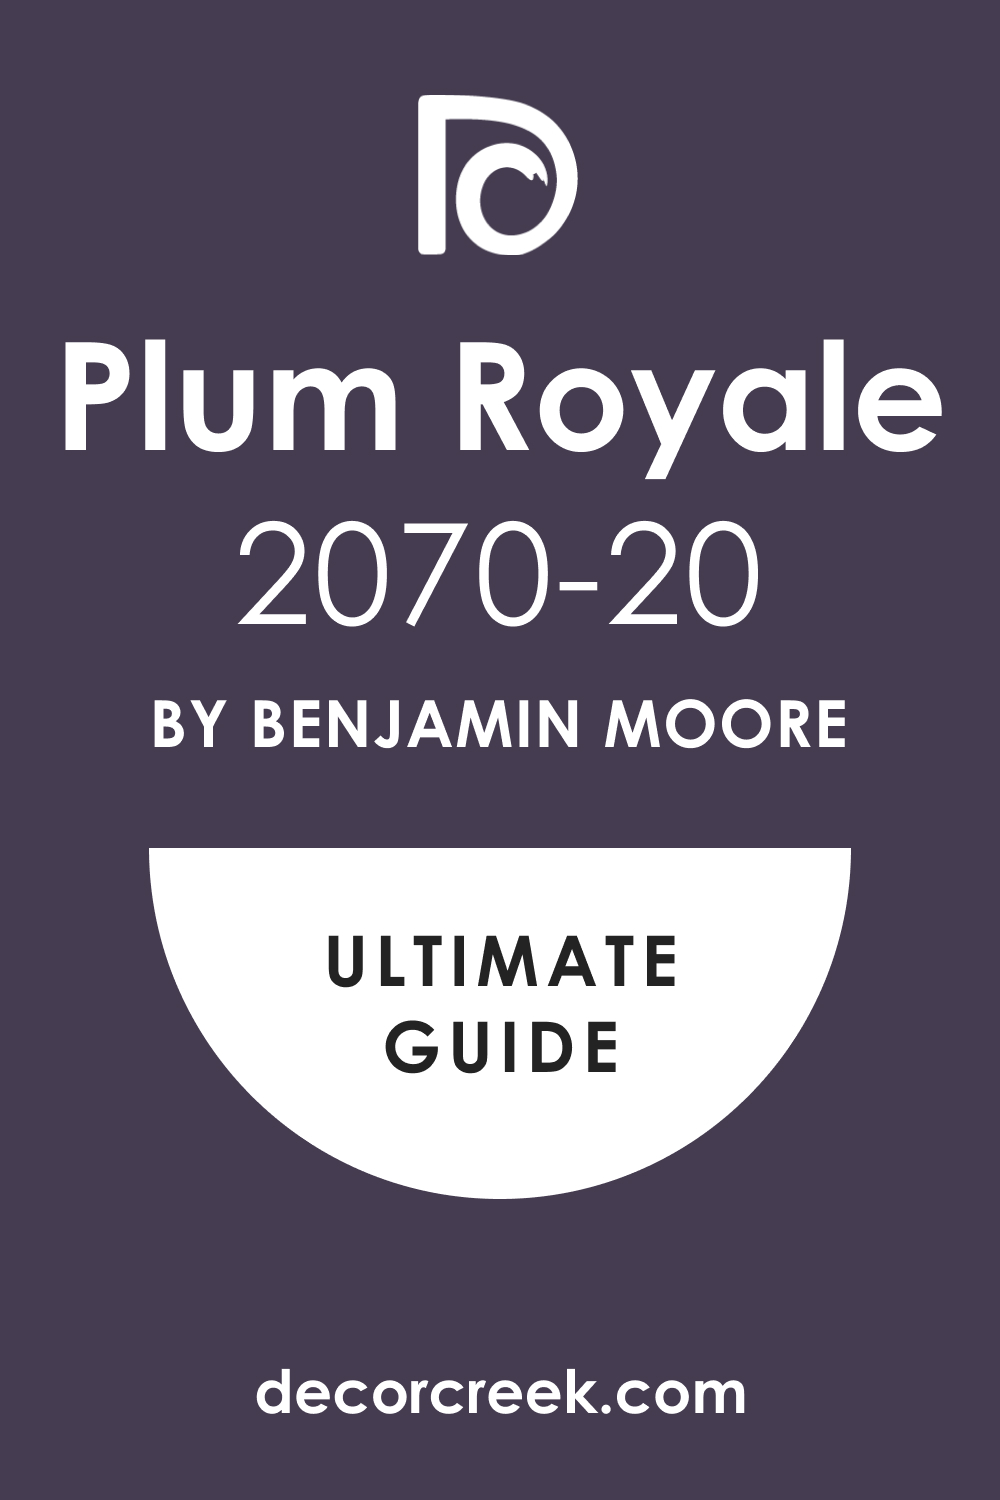 Ultimate Guide of Plum Royale 2070-20 